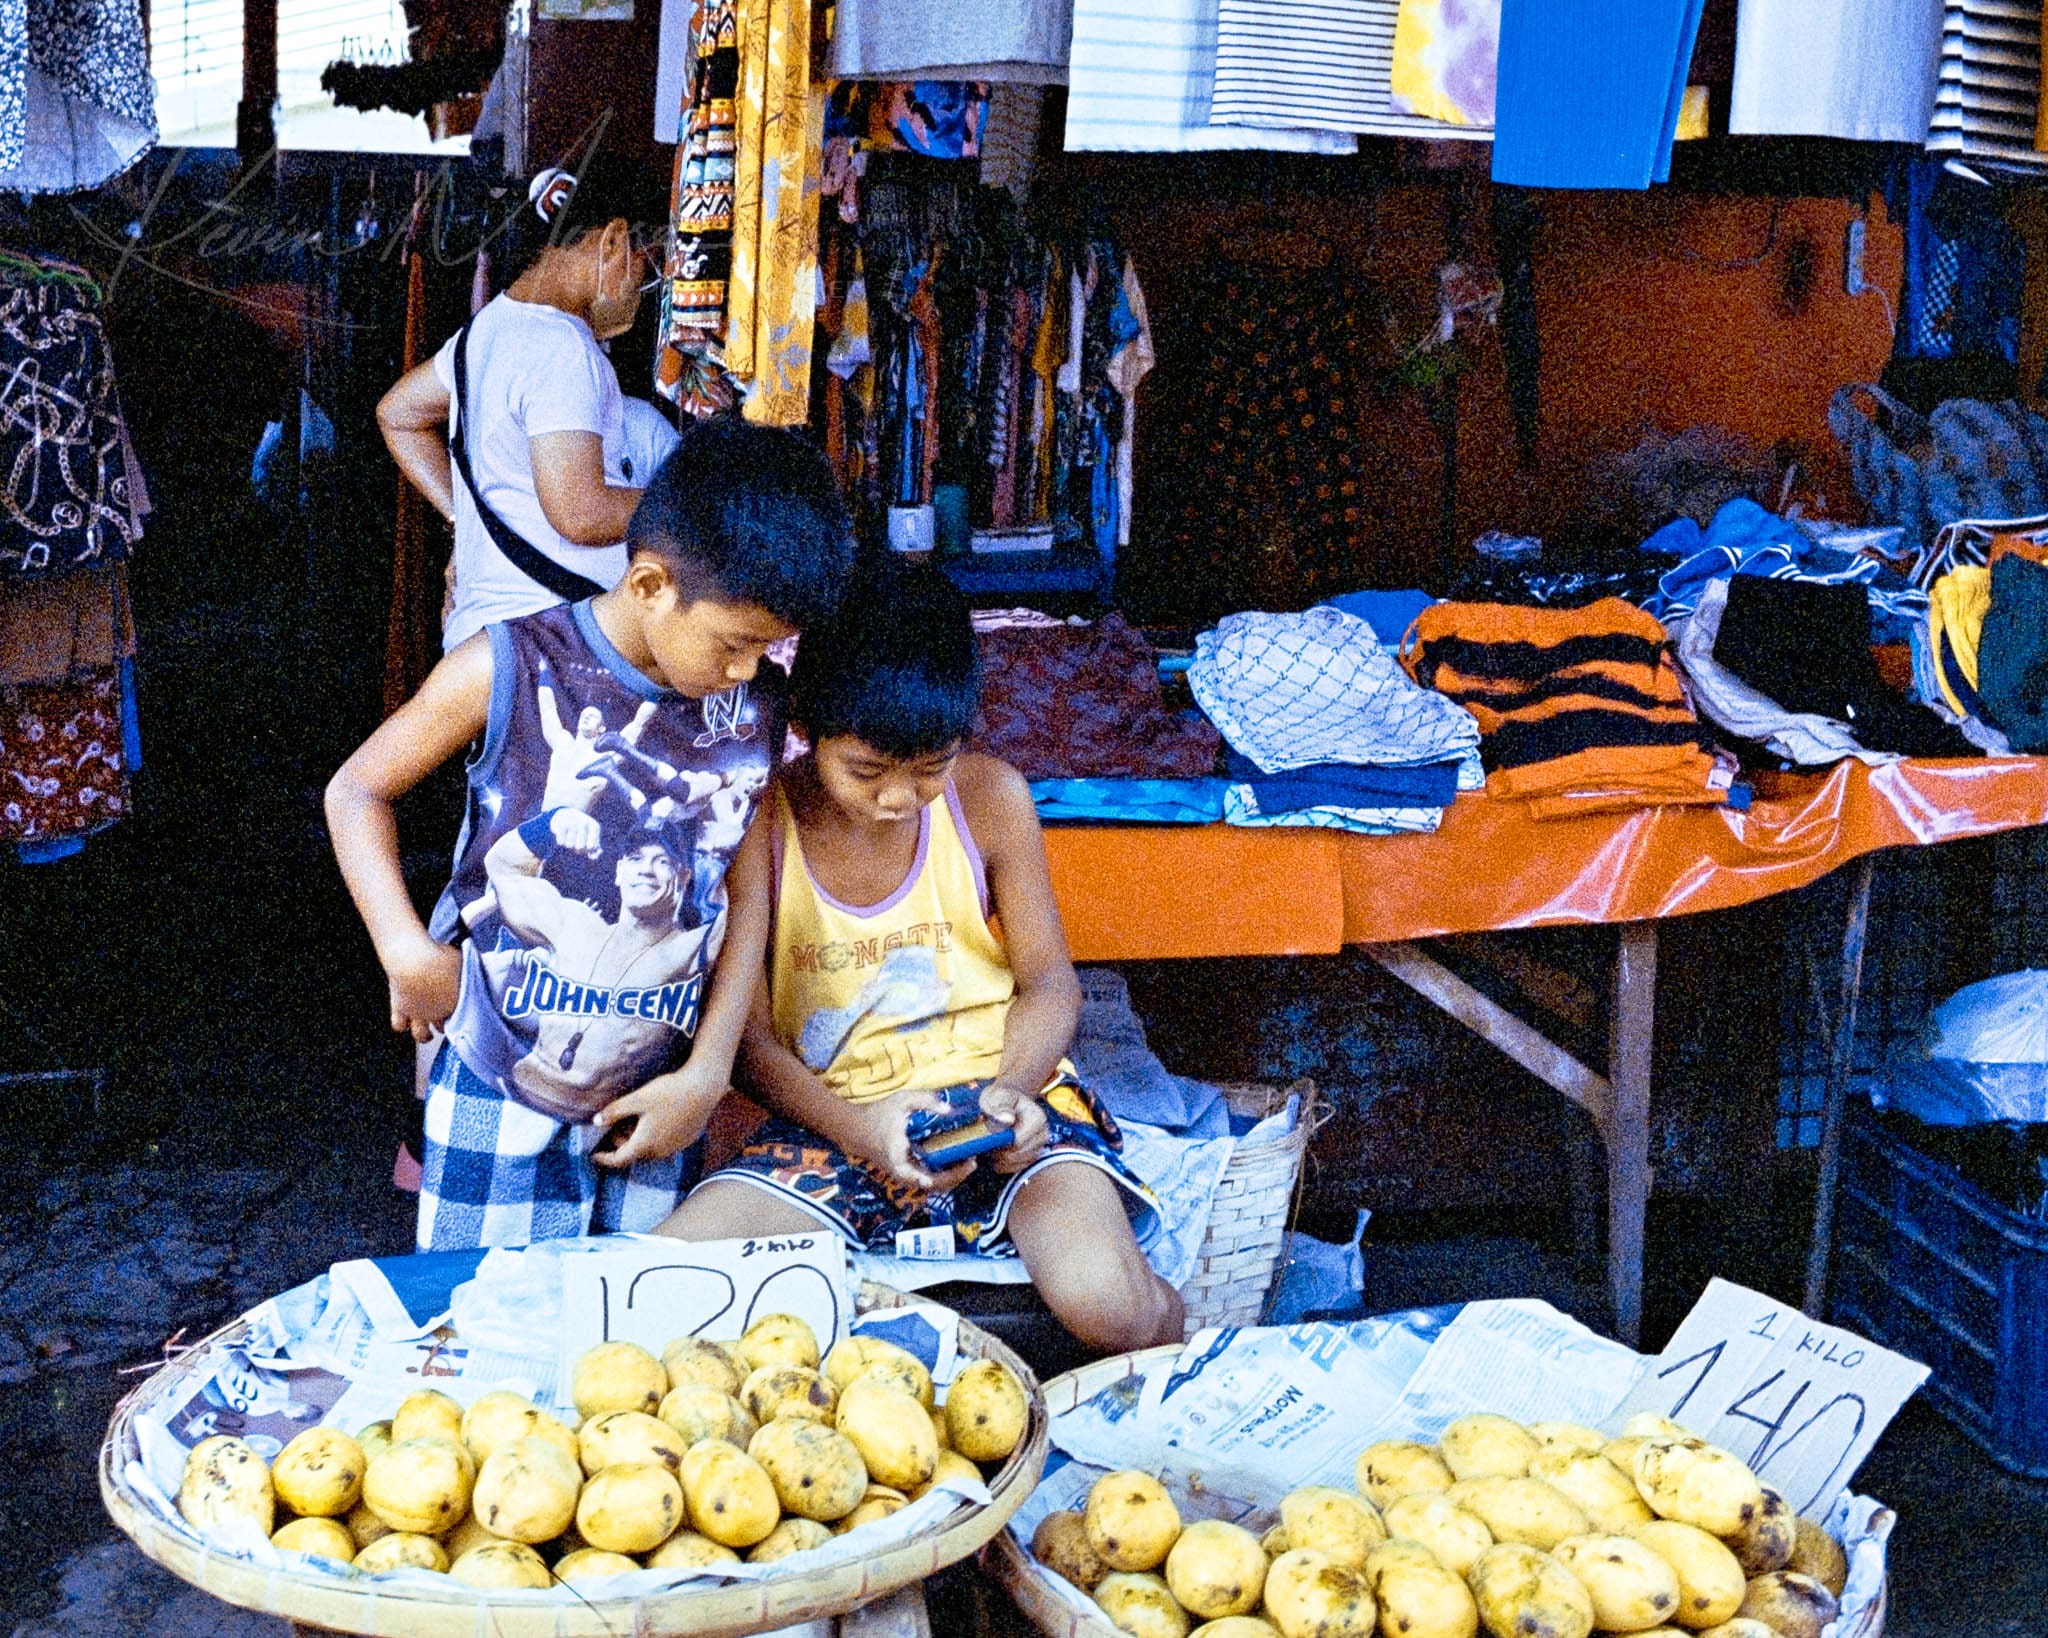 Children selling mangoes at a bustling, colorful outdoor market during daytime.